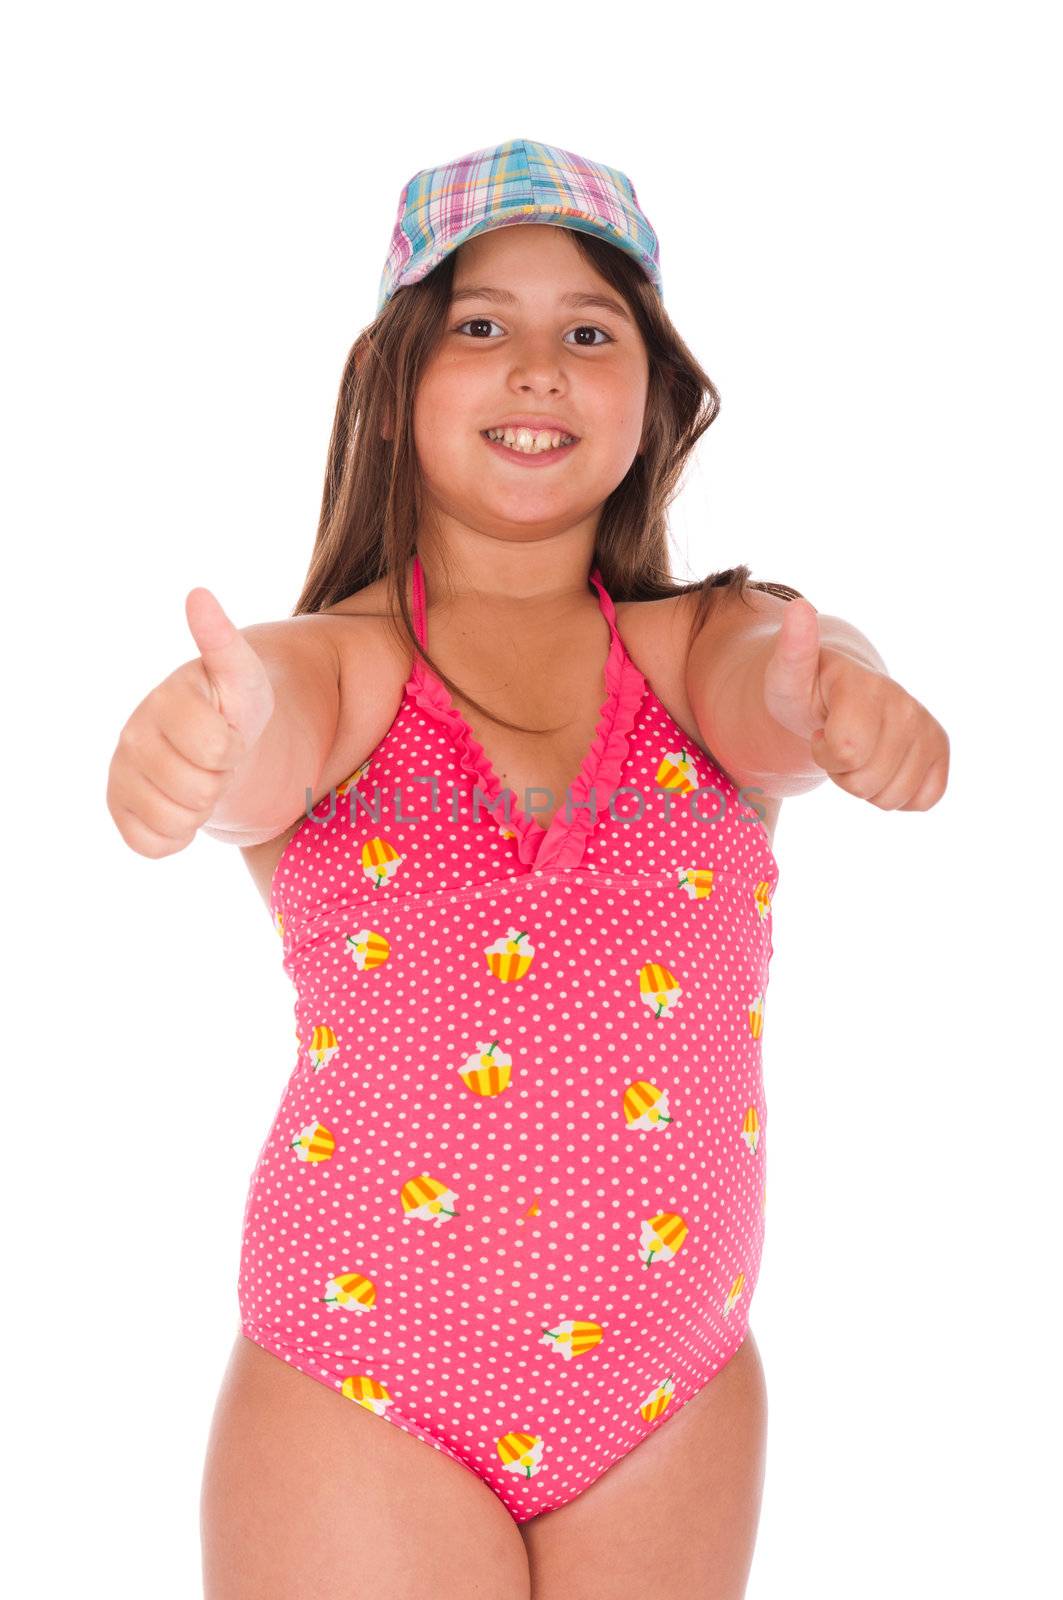 Girl in swimsuit showing thumbs up by luissantos84